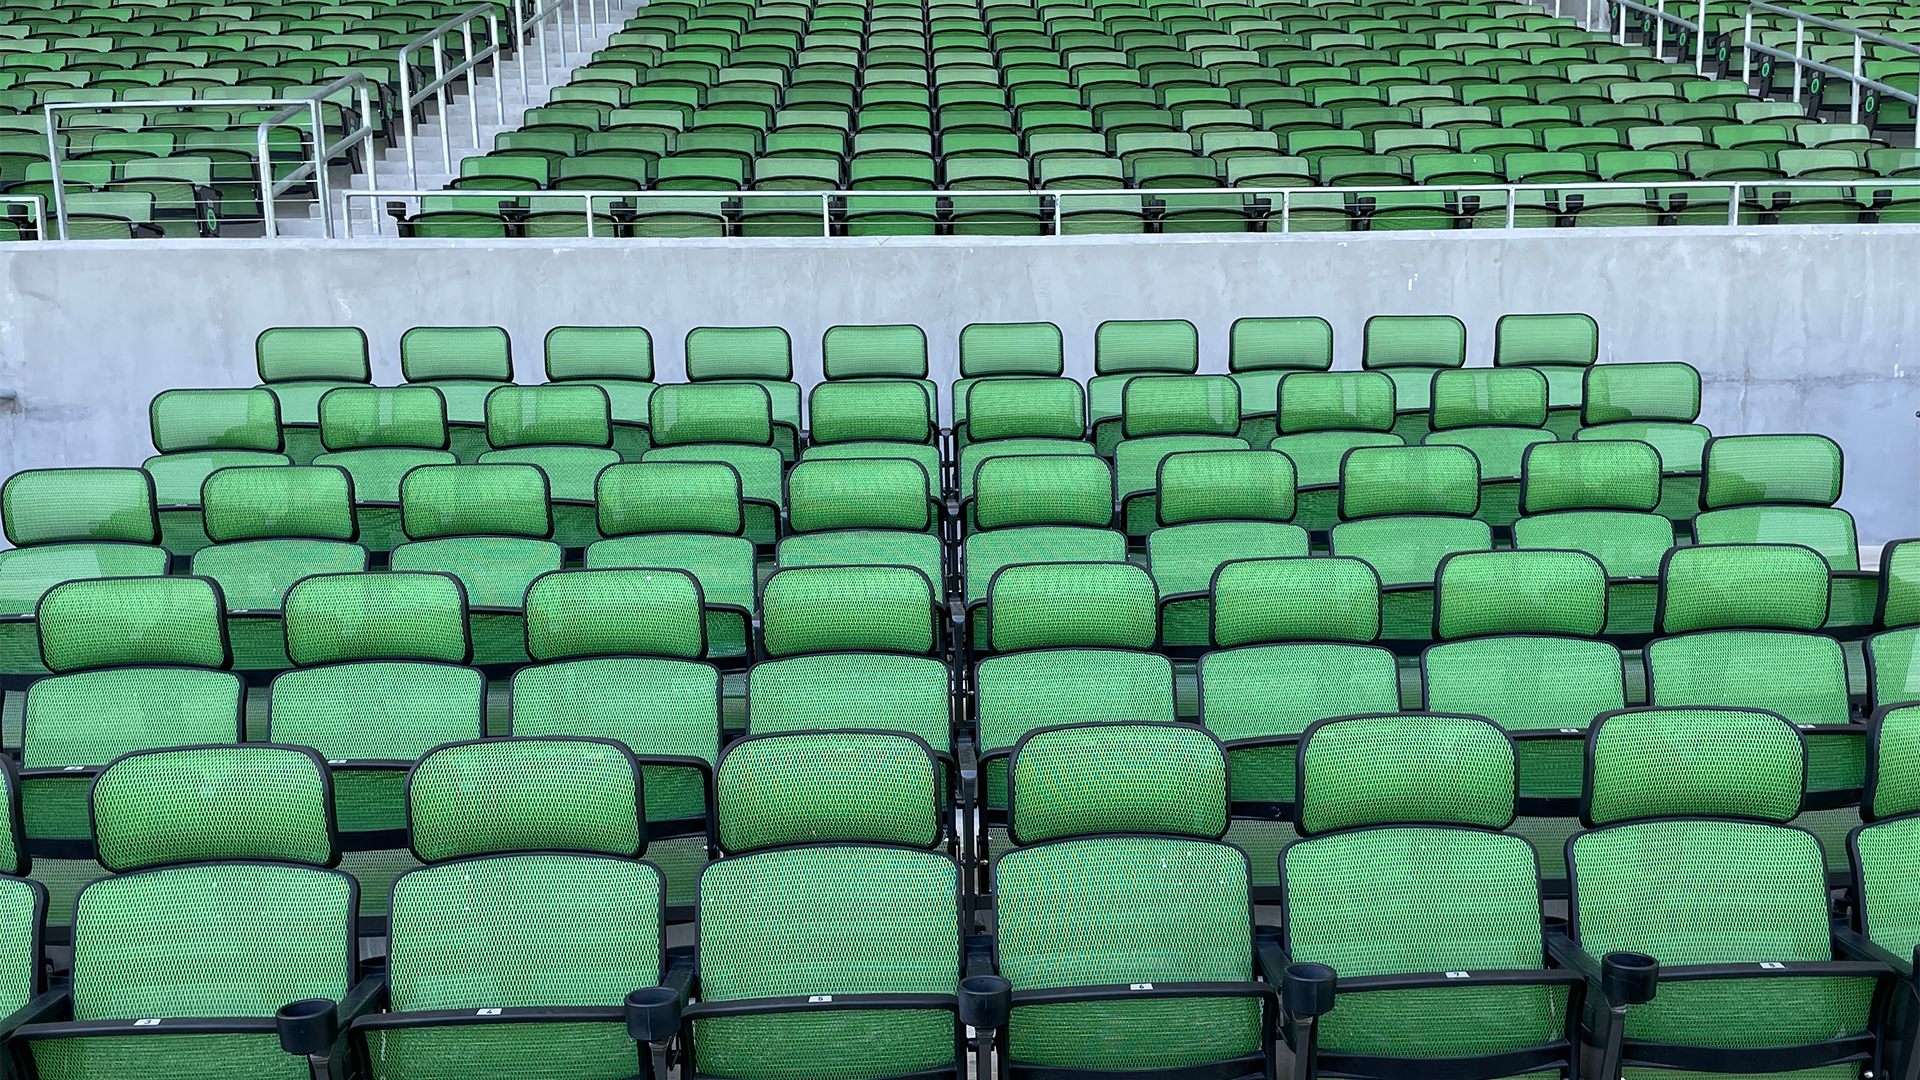 Austin FC Green Suite and Row seating